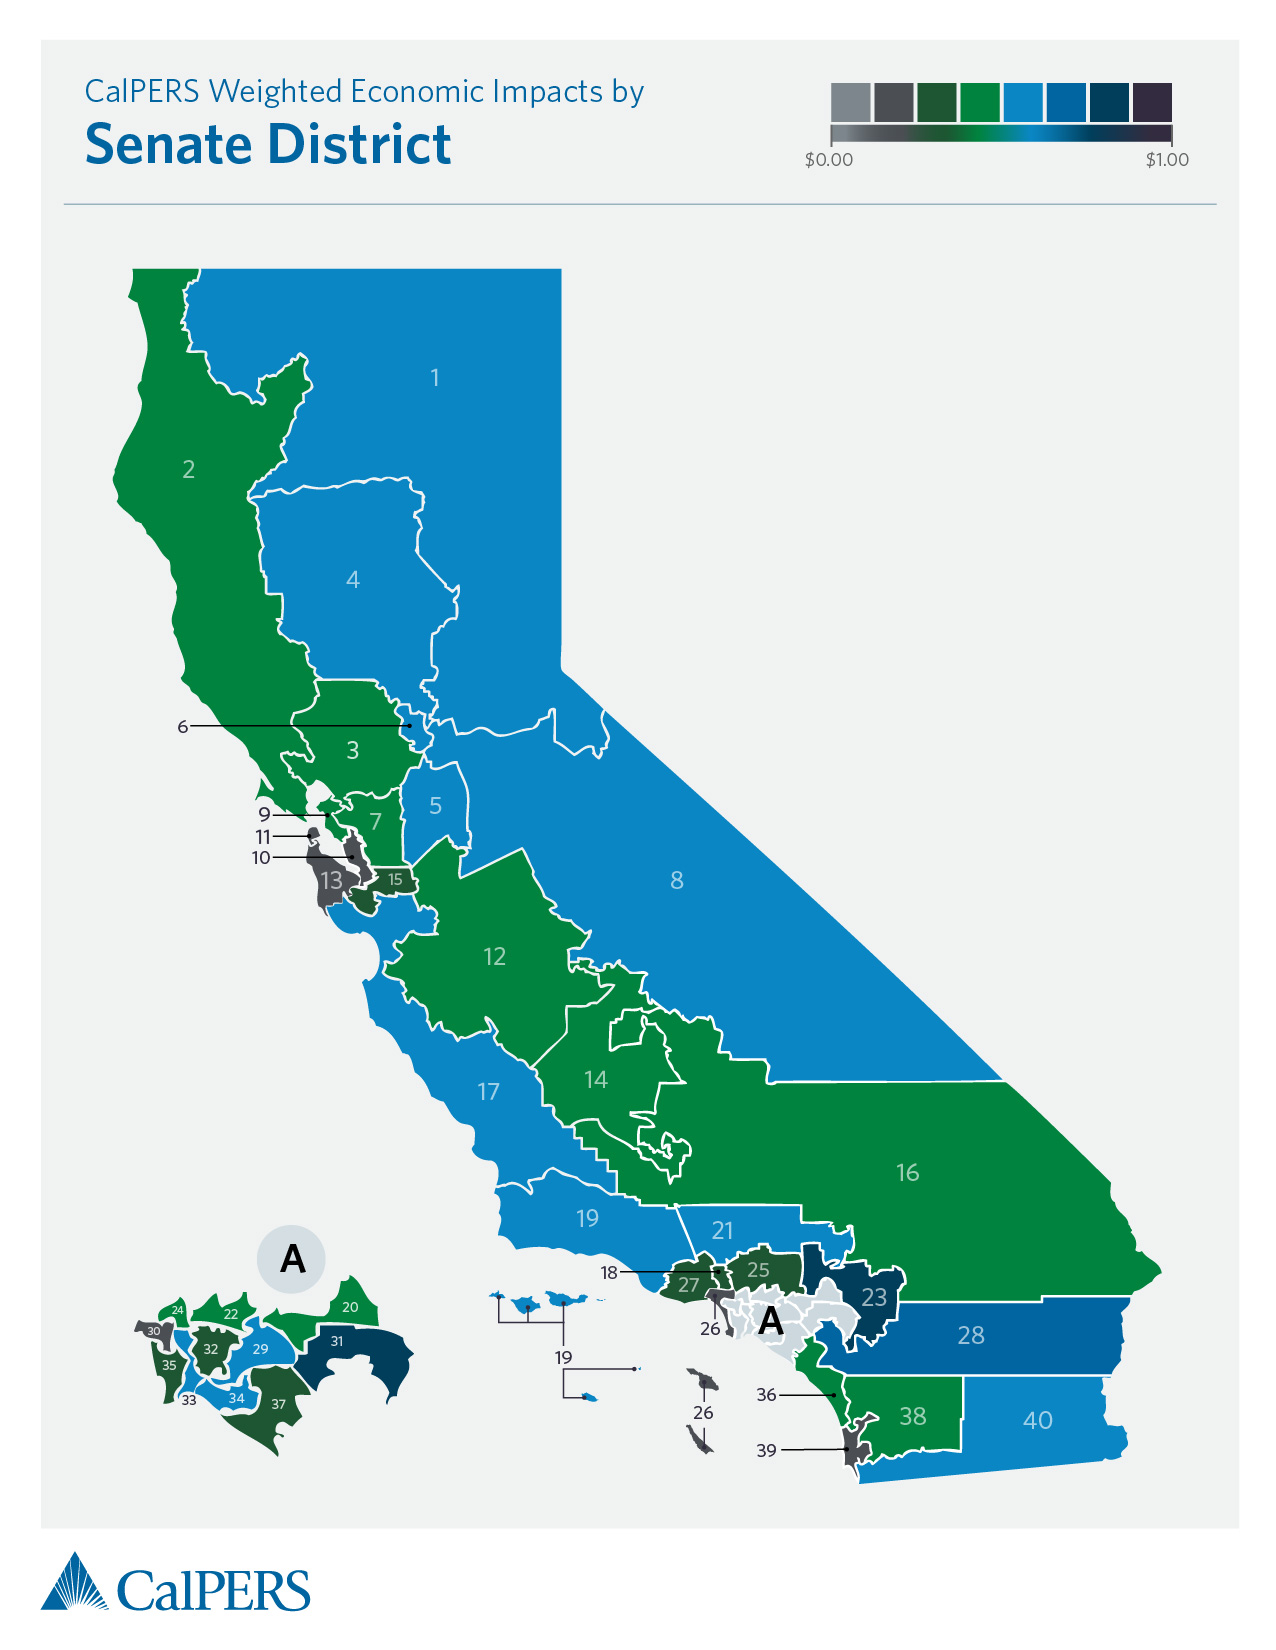 CalPERS Economic Impacts of Benefit Payments by Senate District